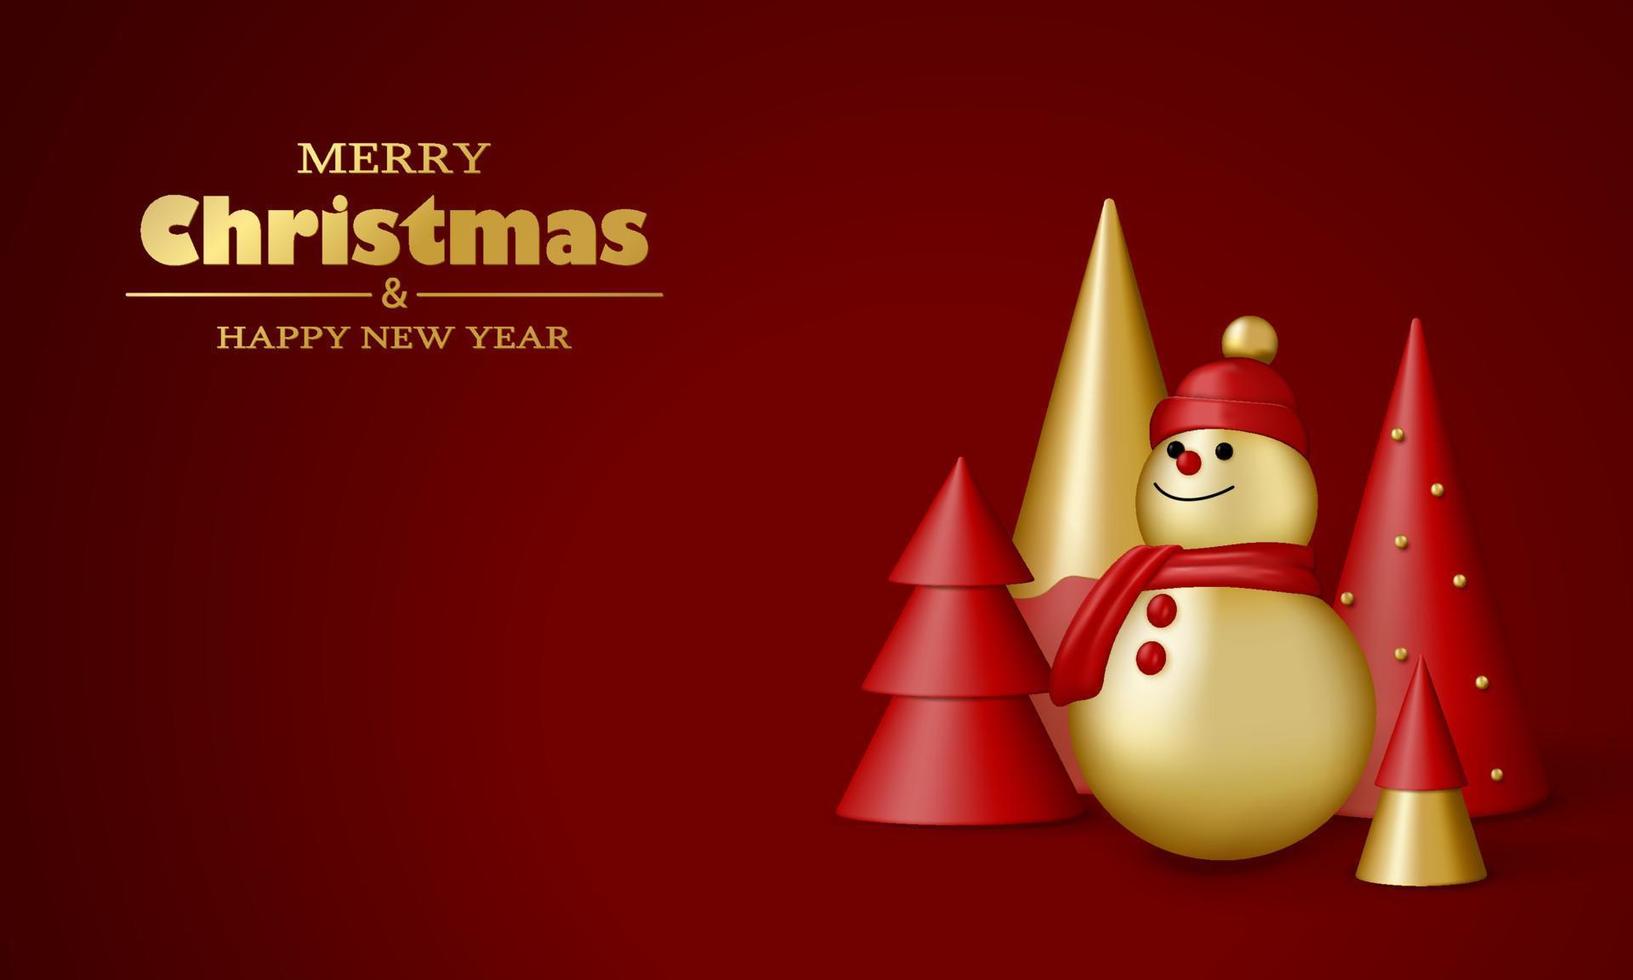 Merry Christmas and Happy New Year card. Red and gold 3D objects. Christmas tree and snowman. vector